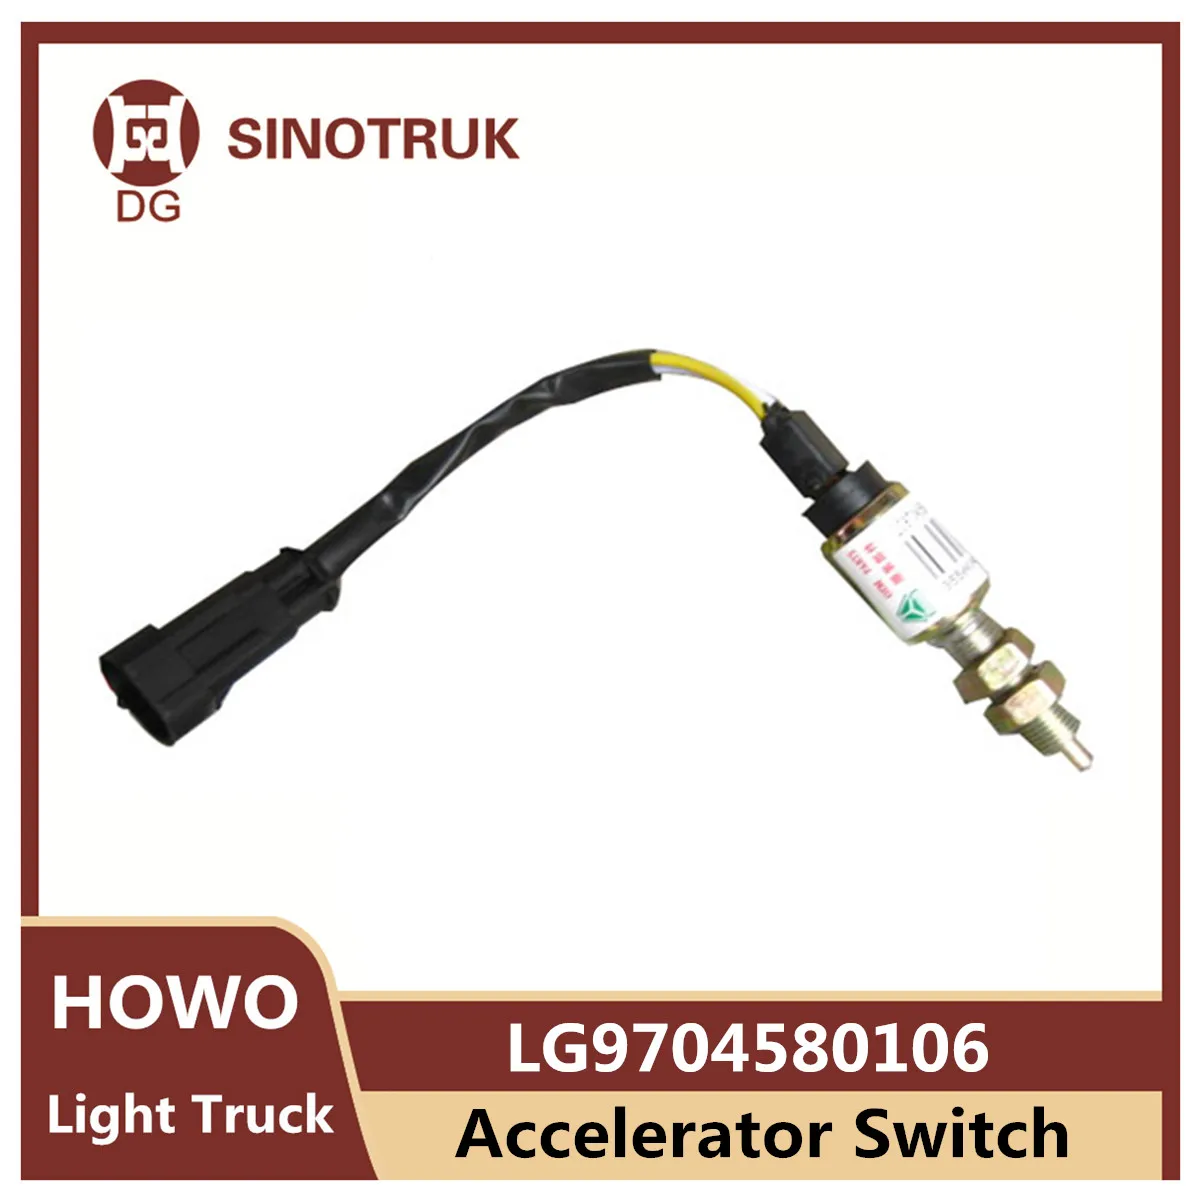 Accelerator Switch LG9704580106 for Sinotruk Howo Light Truck Clutch Switch Original Auto Truck Parts wg1662512139 seat height valve assembly for sinotruk howo t7 t5g c7 adjust the height of the cab seat truck parts car accessorie